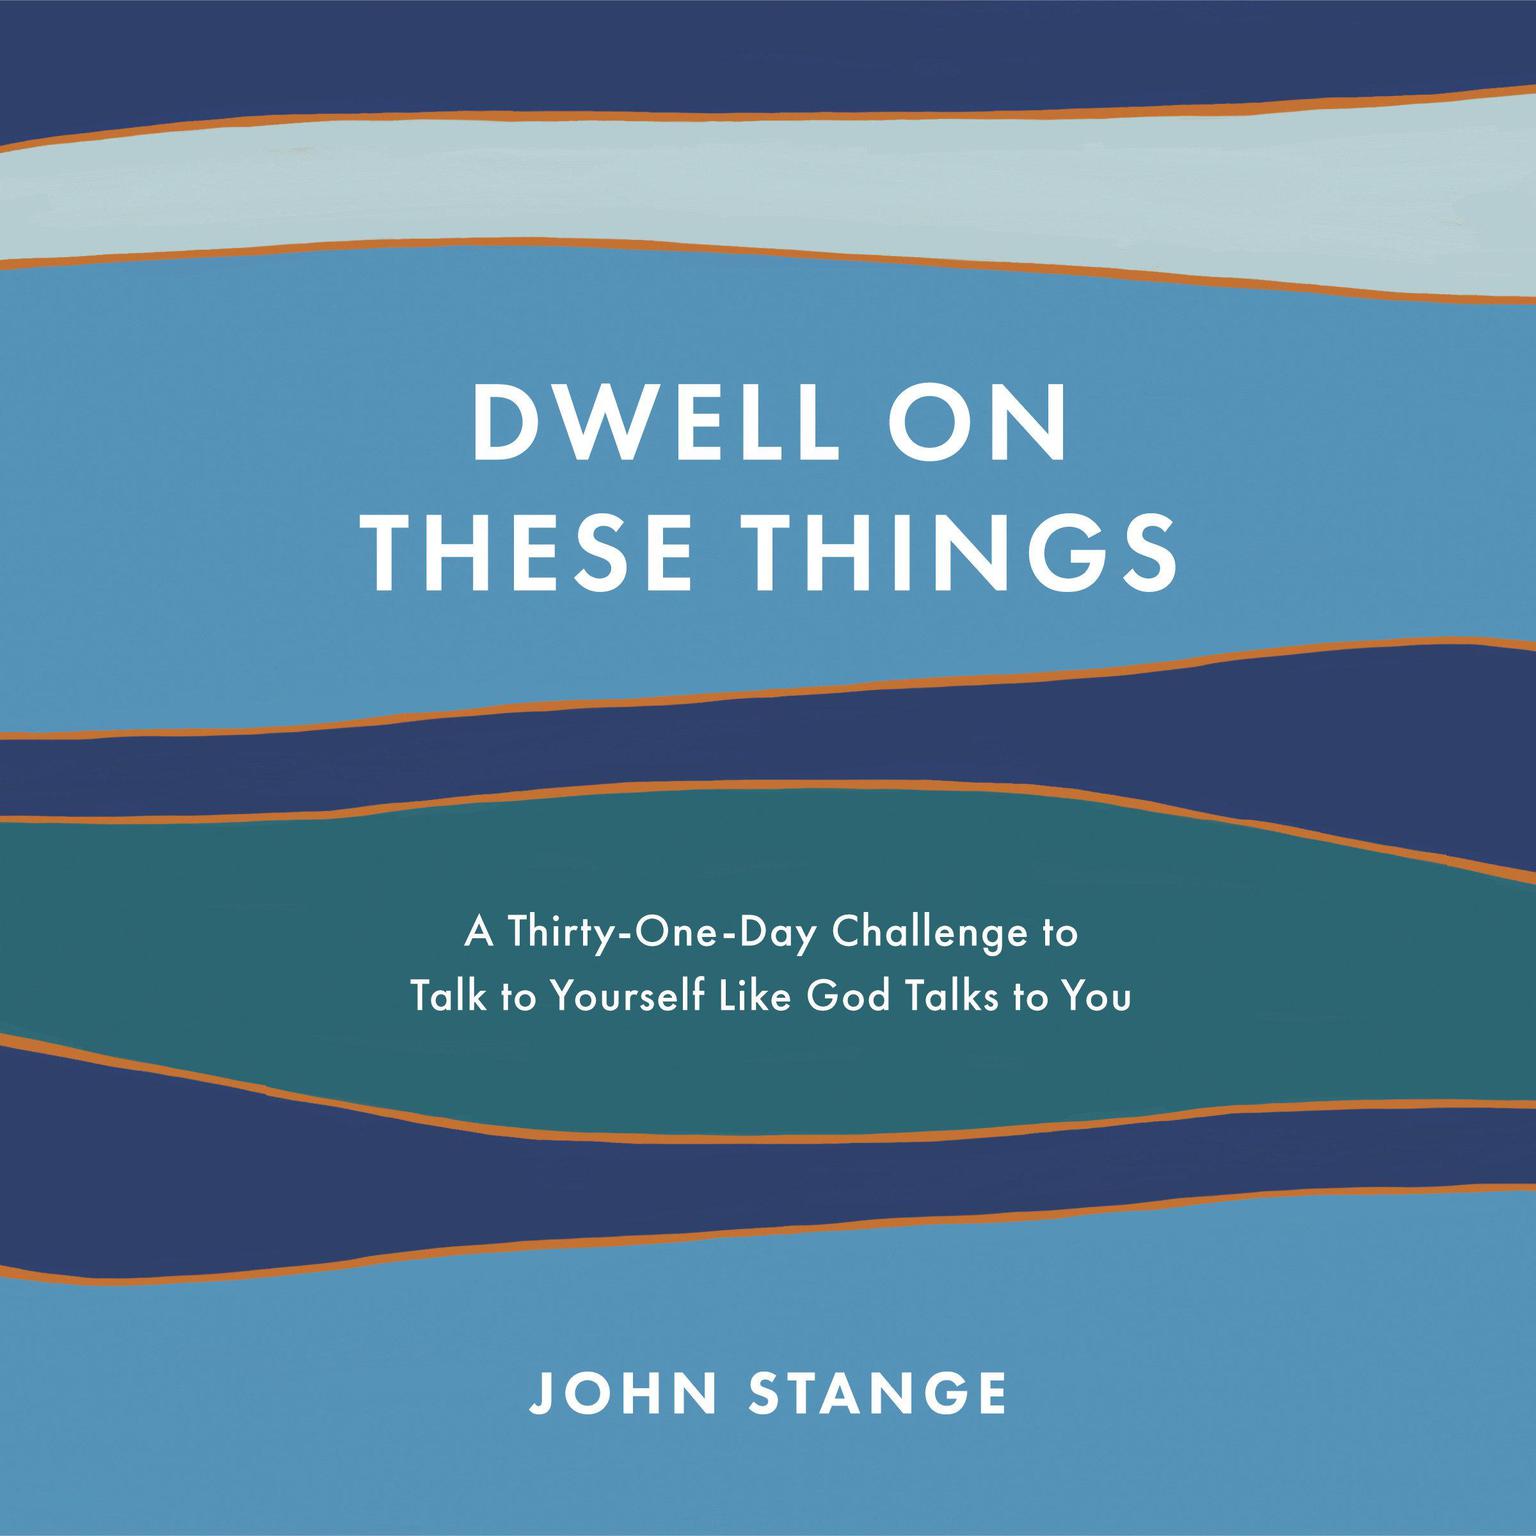 Dwell on These Things: A Thirty-One-Day Challenge to Talk to Yourself Like God Talks to You Audiobook, by John Stange